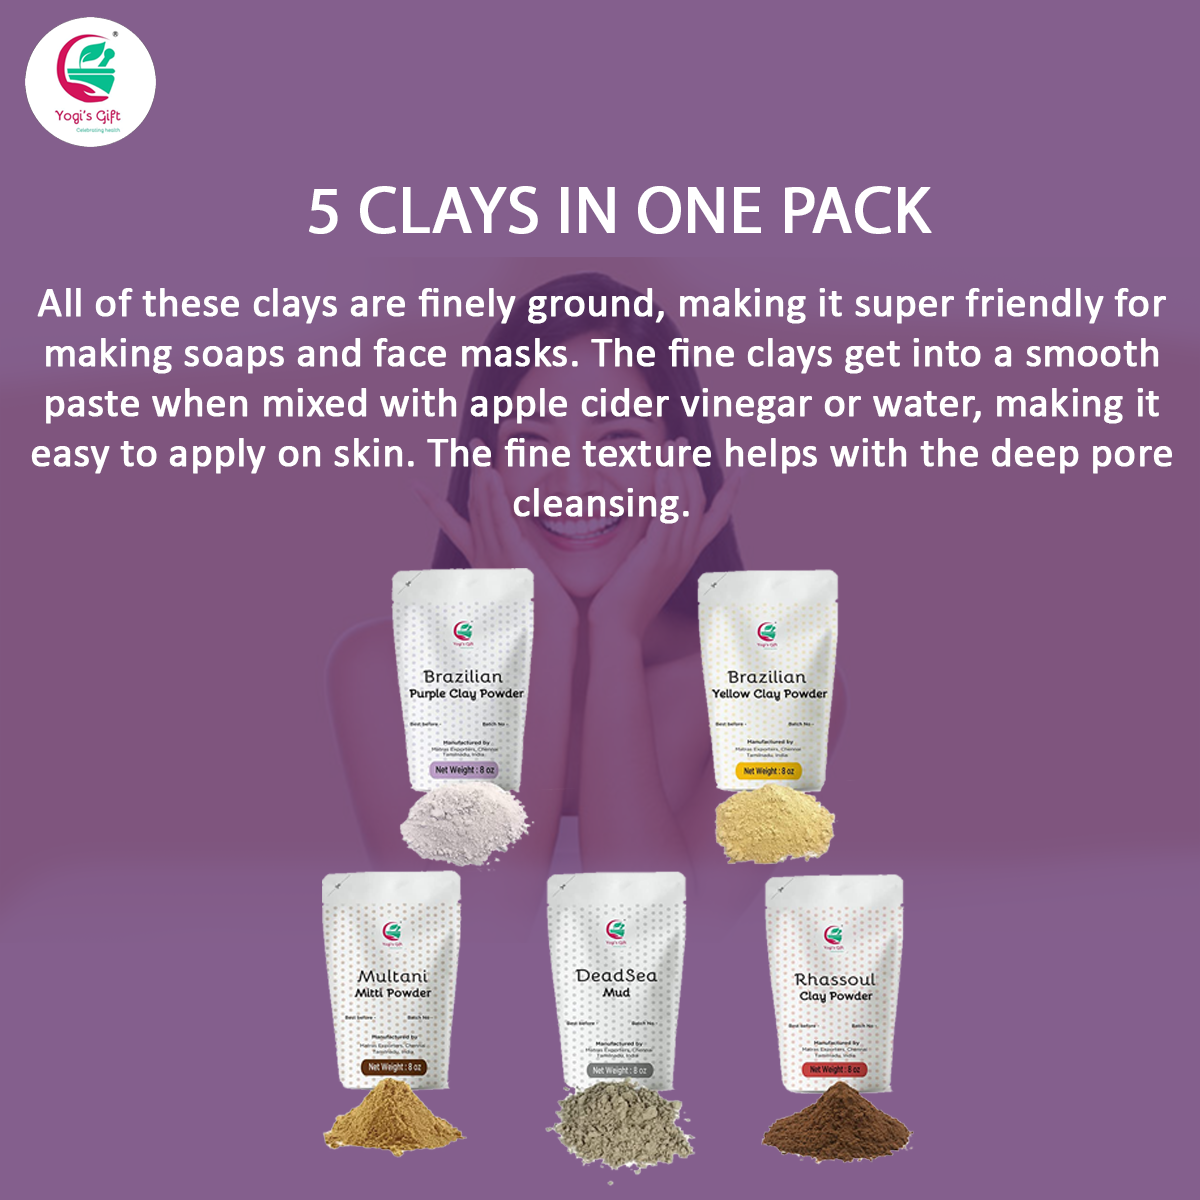 Five Natural Clays | Soap Making Clay | Face Mask Ingredient | Purple clay, Yellow clay, Multani Mitti, Dead Sea Mud & Rhassoul Clays | 8oz each | Best Value Pack of Colourful Clays | by Yogi’s Gift®